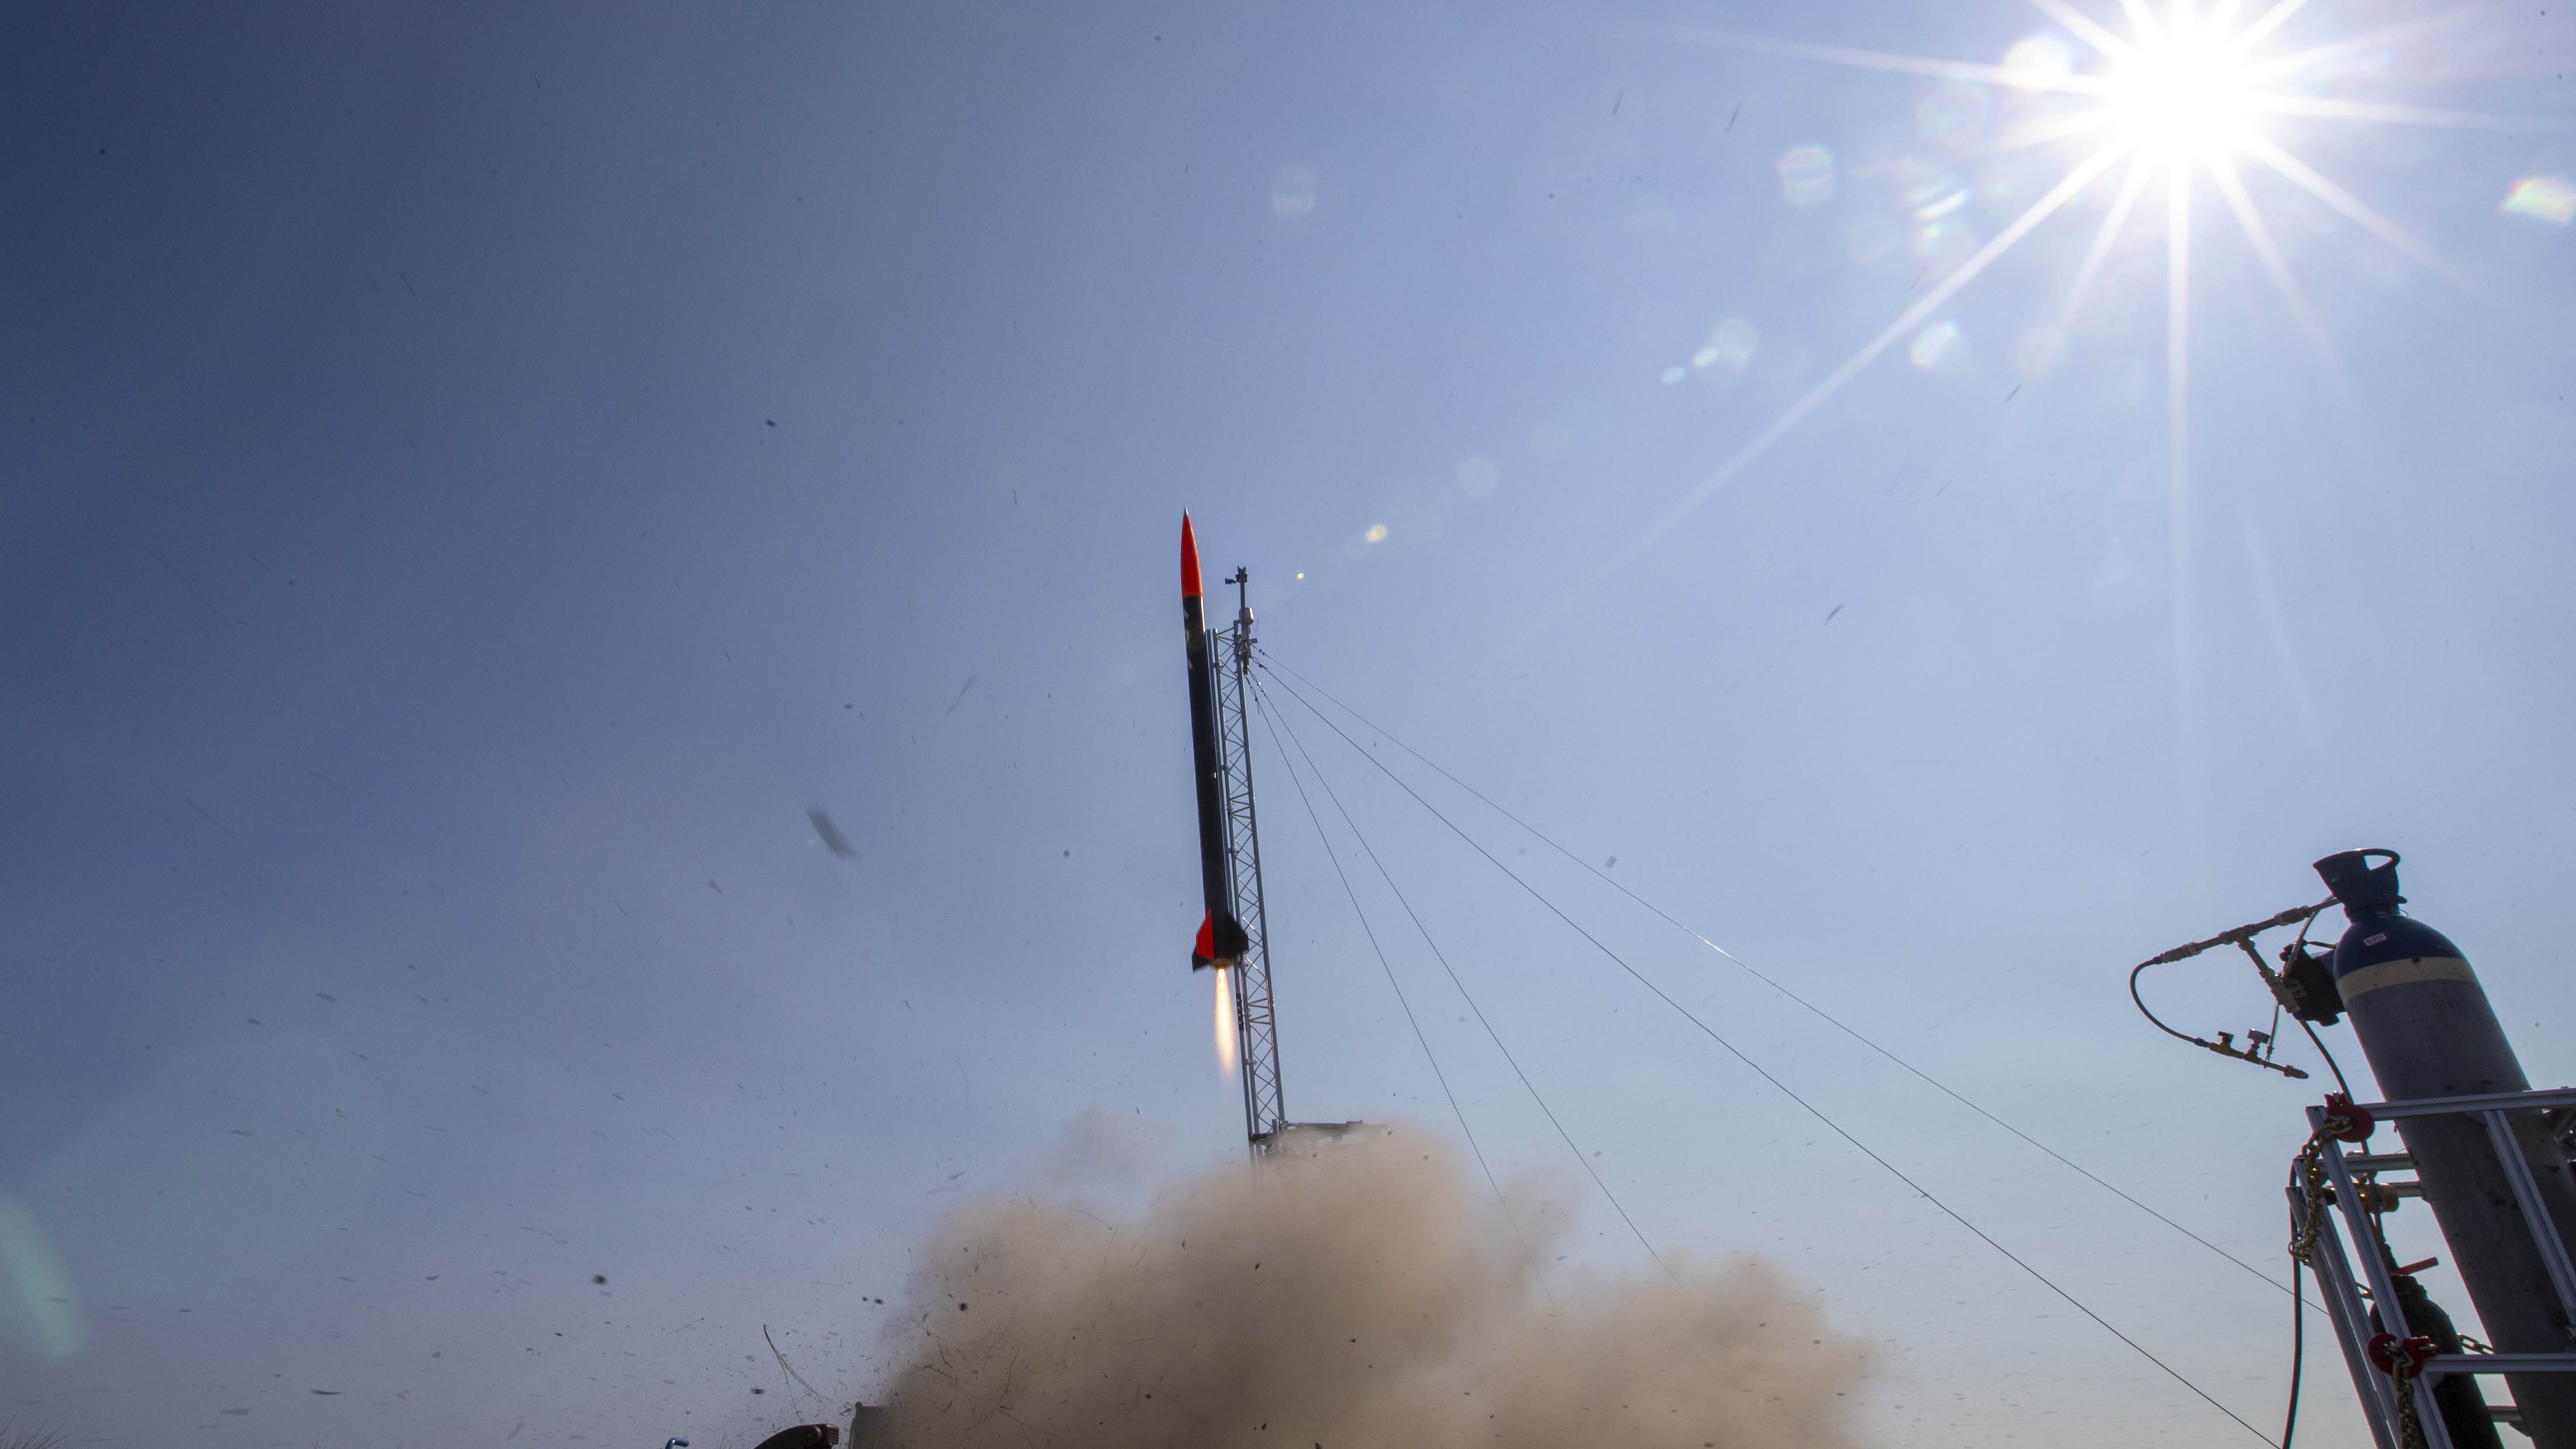 Norfolk firm launches rocket from UK island in bid to make space research more accessible ITV News Anglia pic